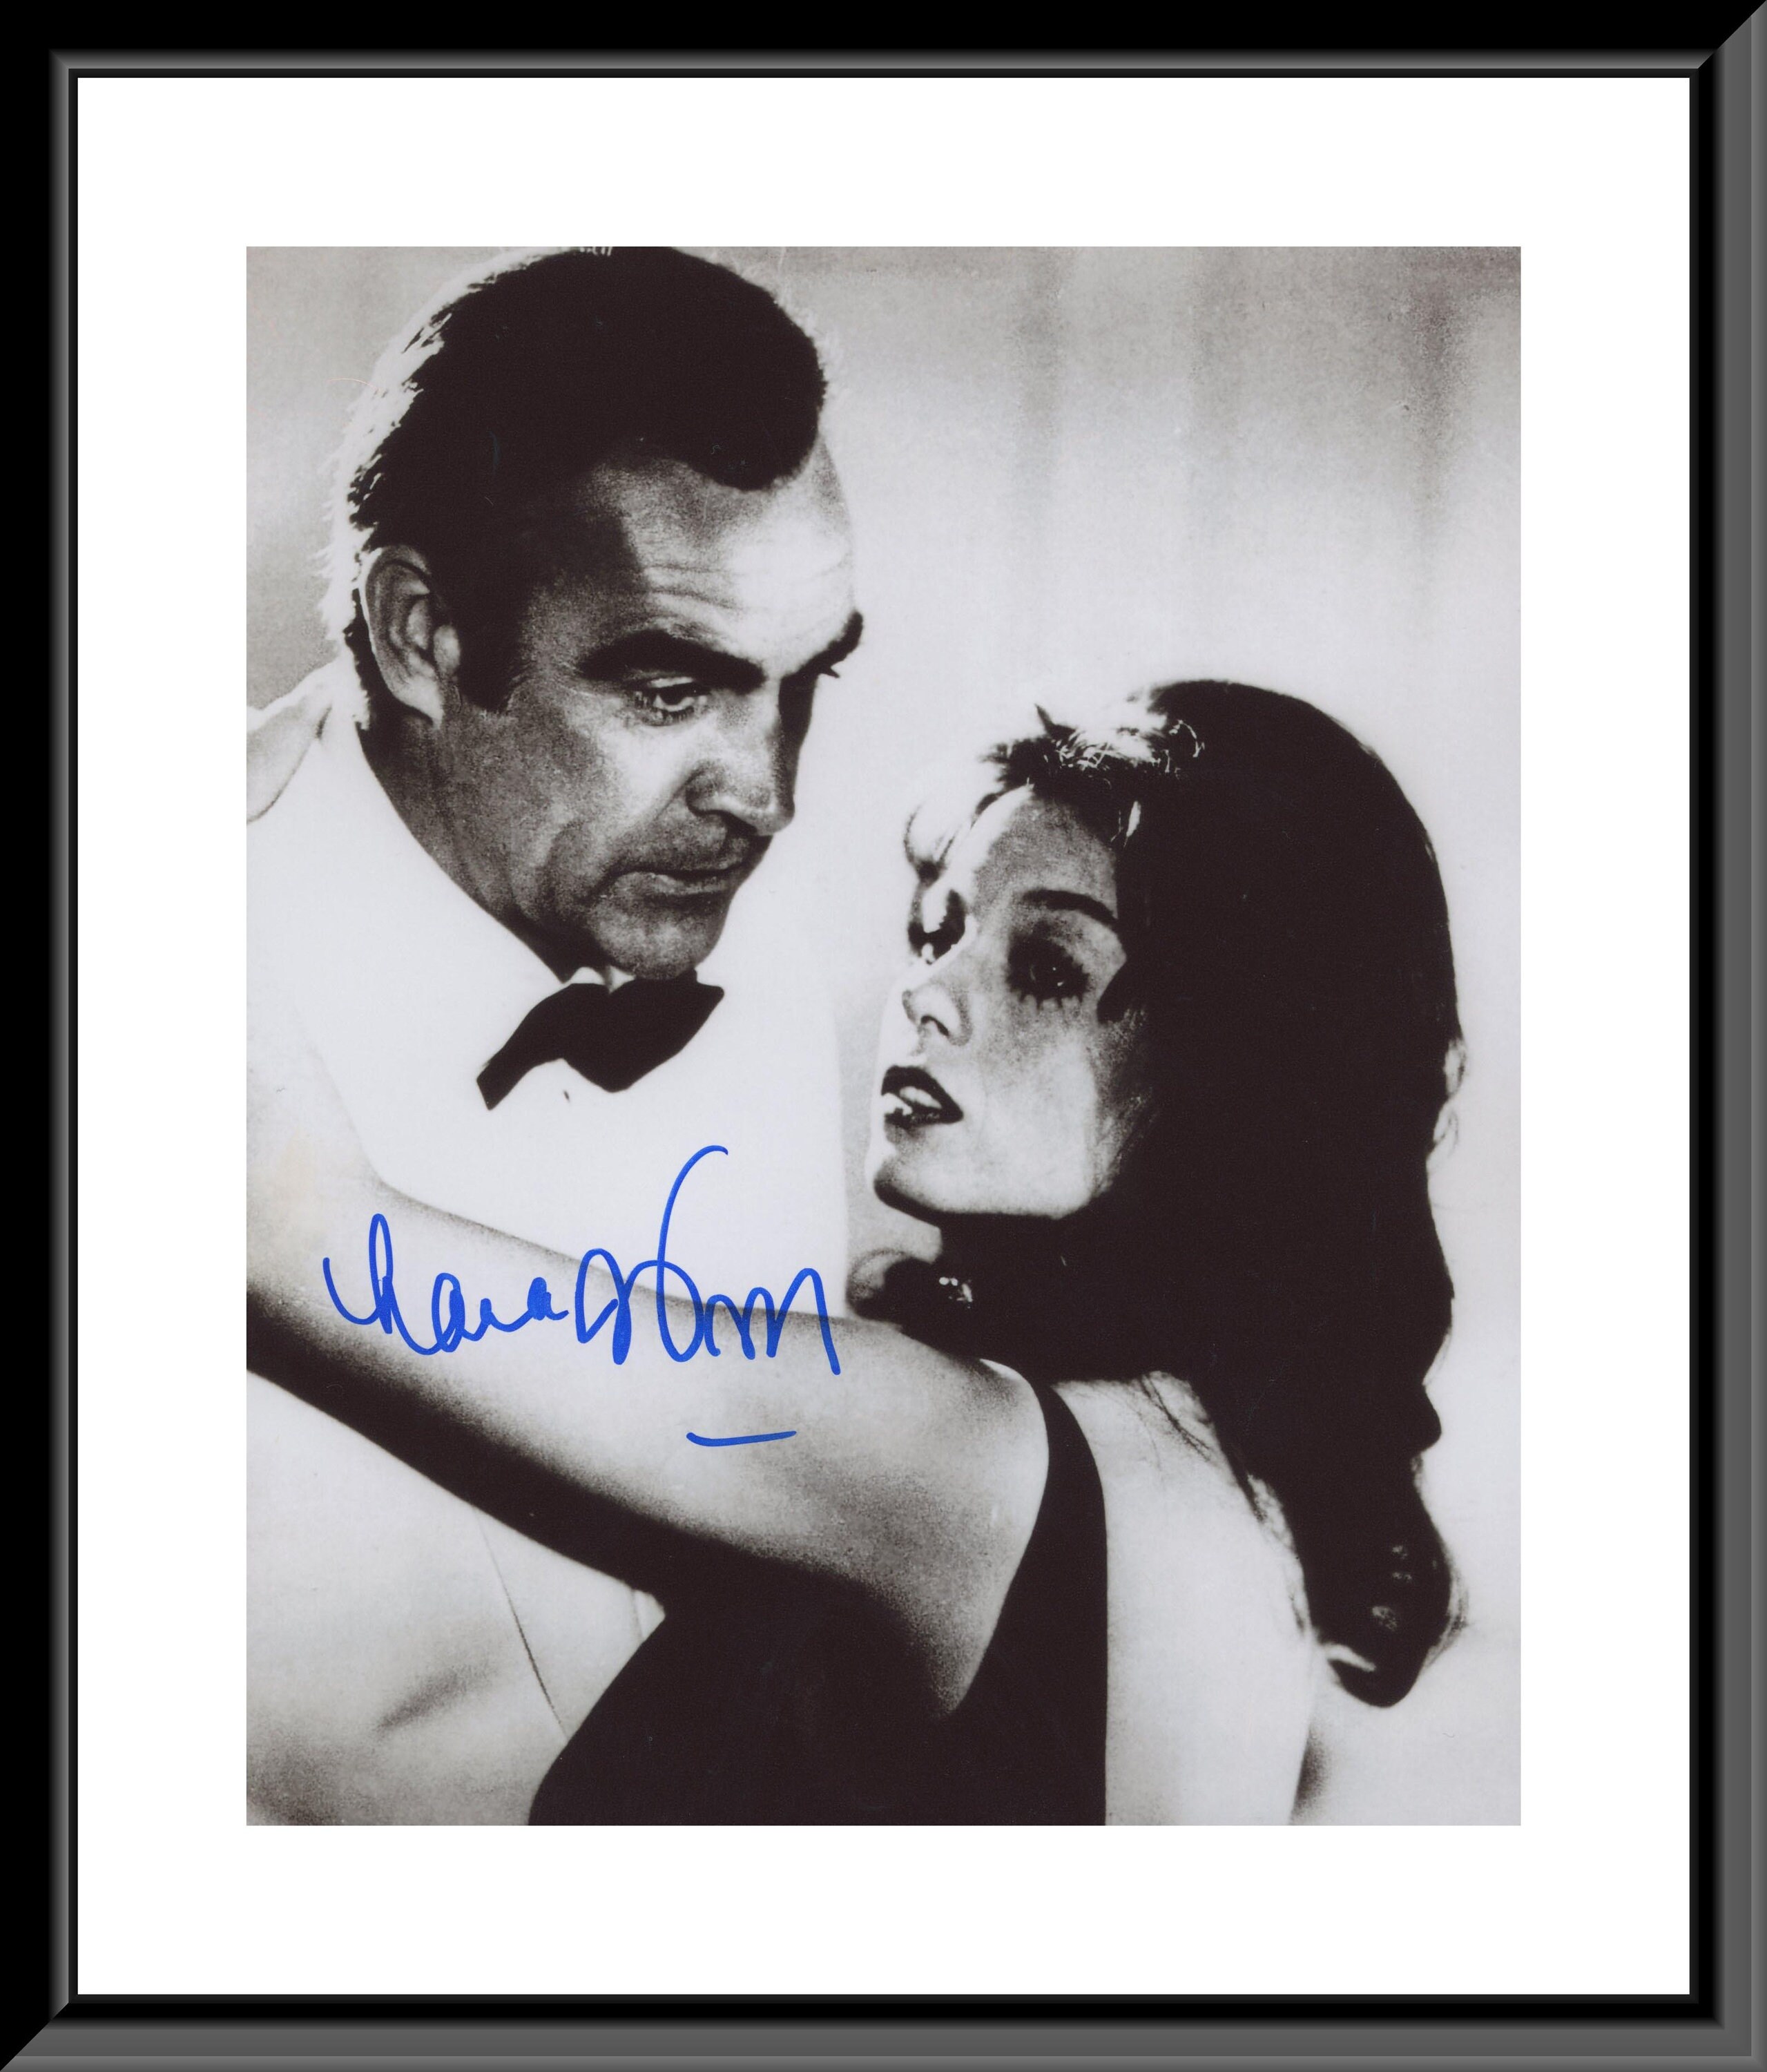 LANA WOOD AUTOGRAPHED 8X10 PHOTO WITH SISTER NATALIE WOOD SIGNED 